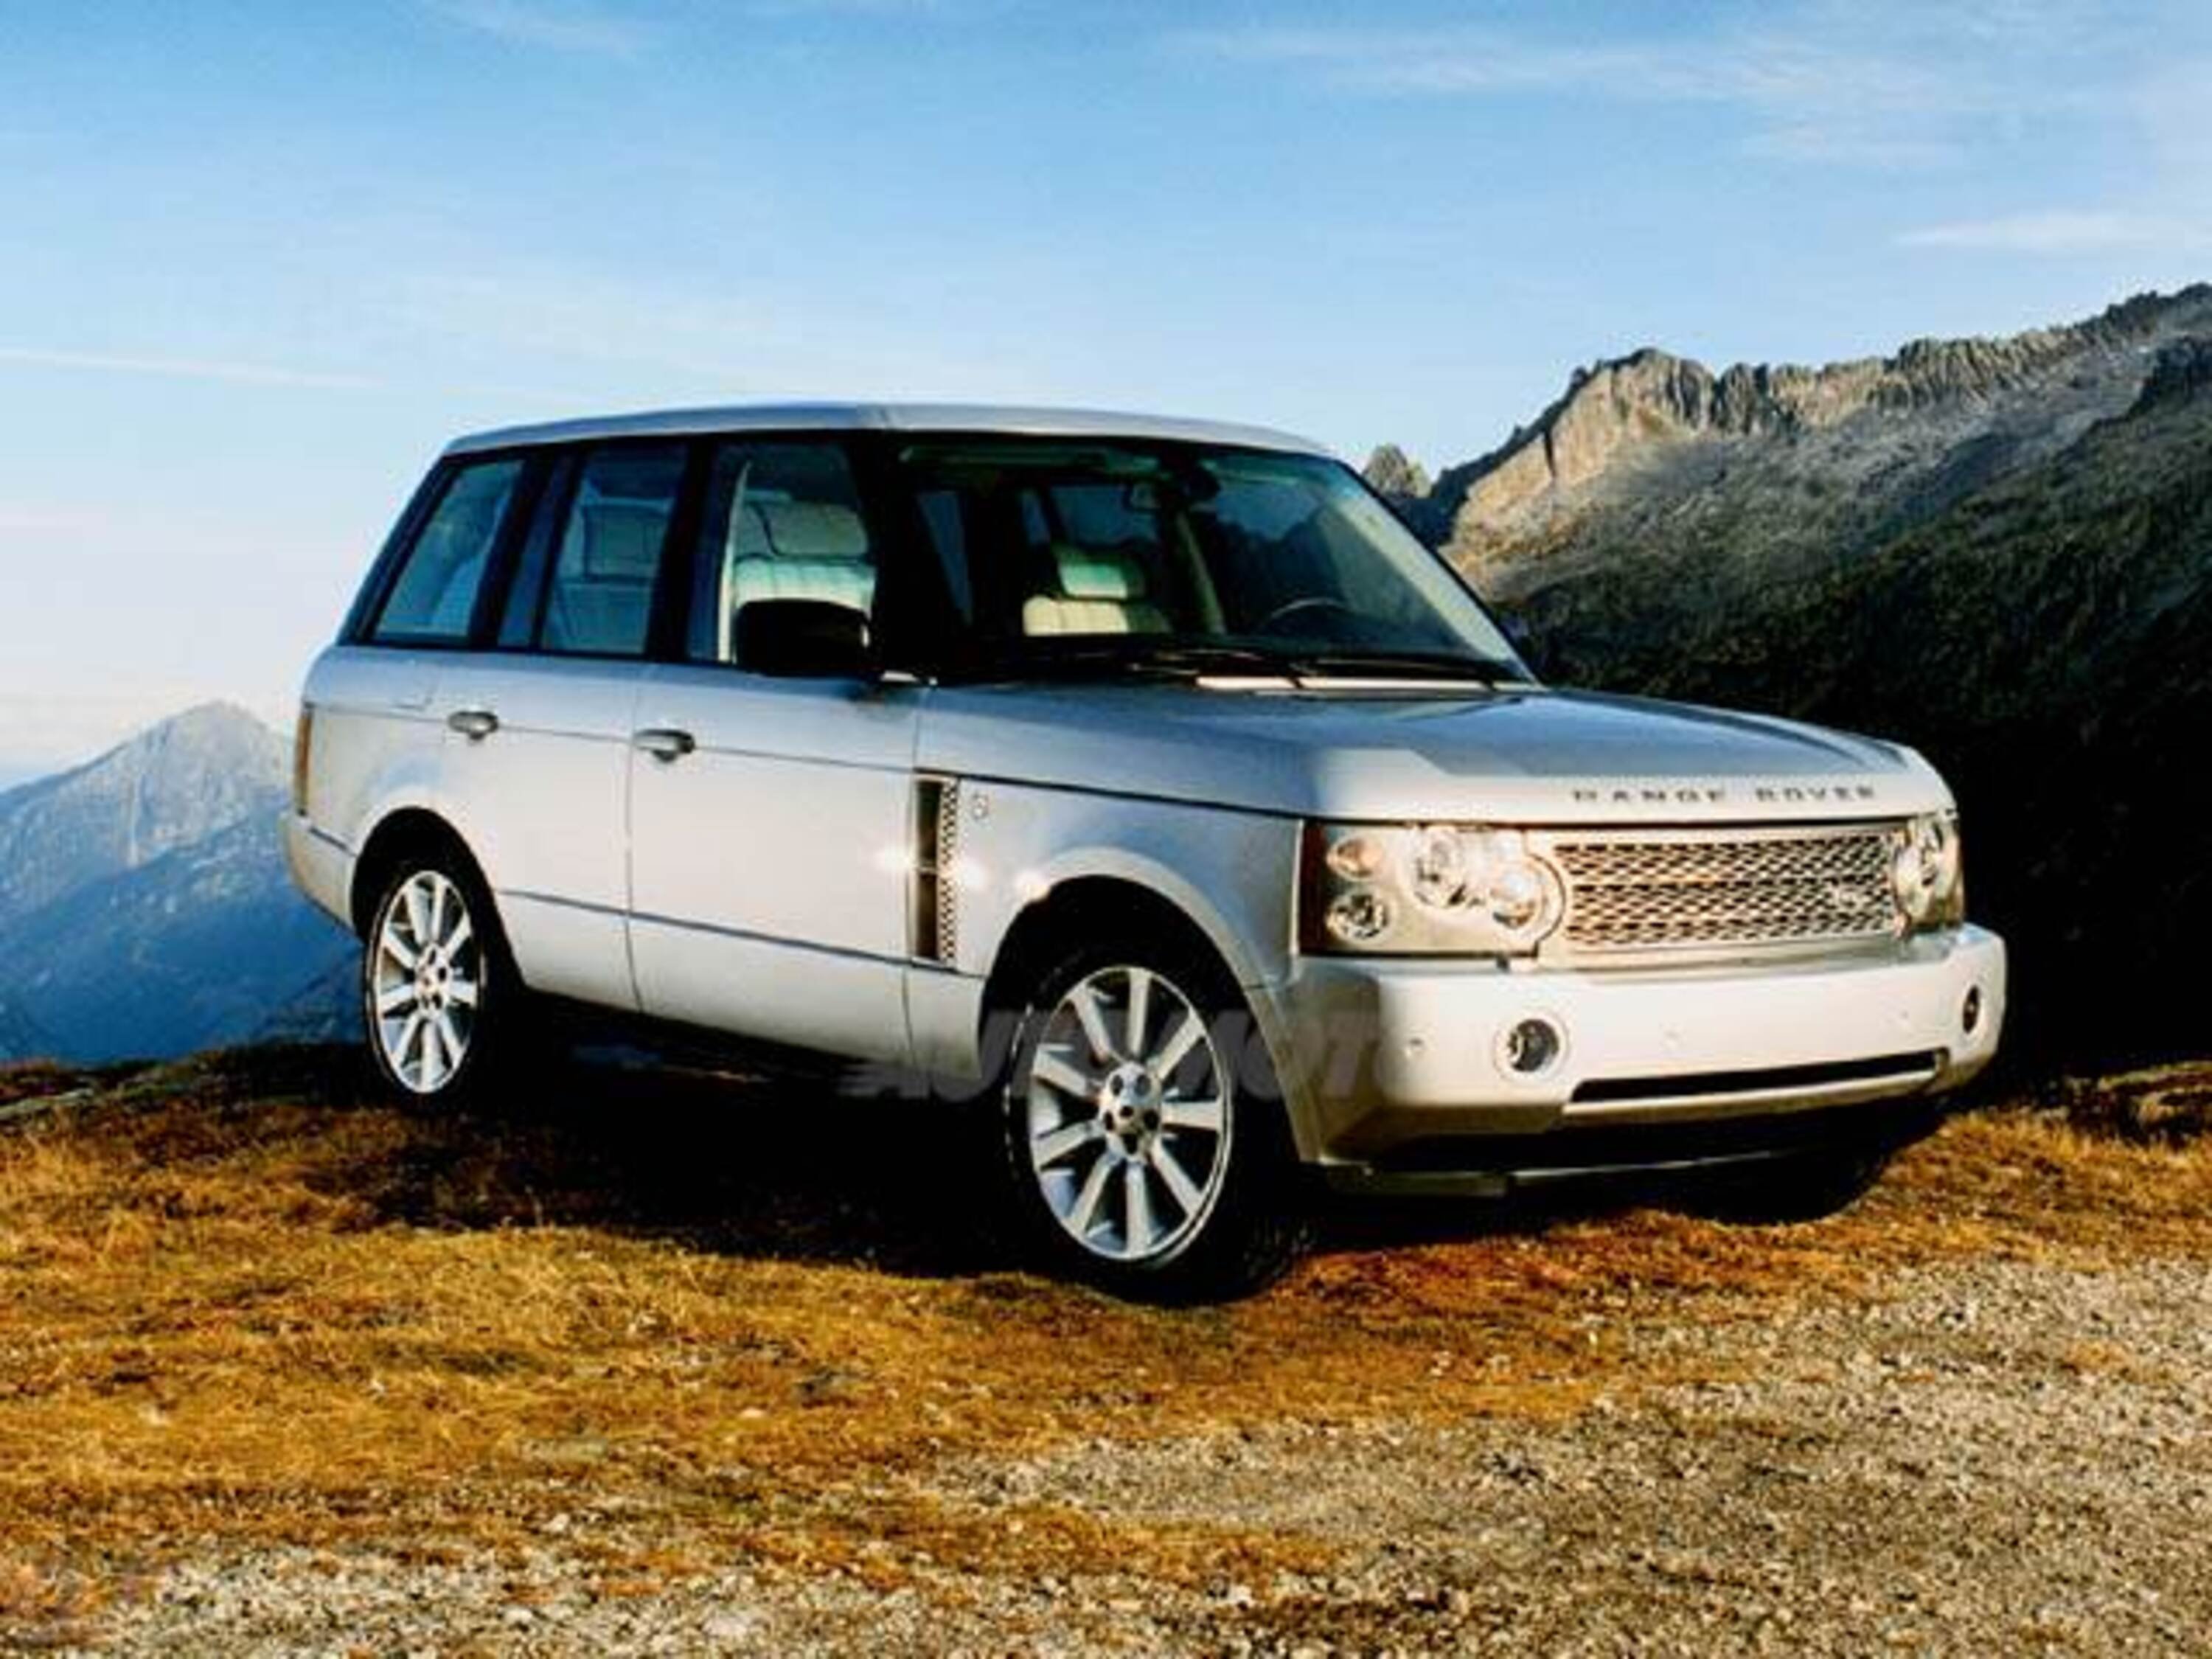 Land Rover Range Rover 3.0 Td6 HSE Foundry my 05